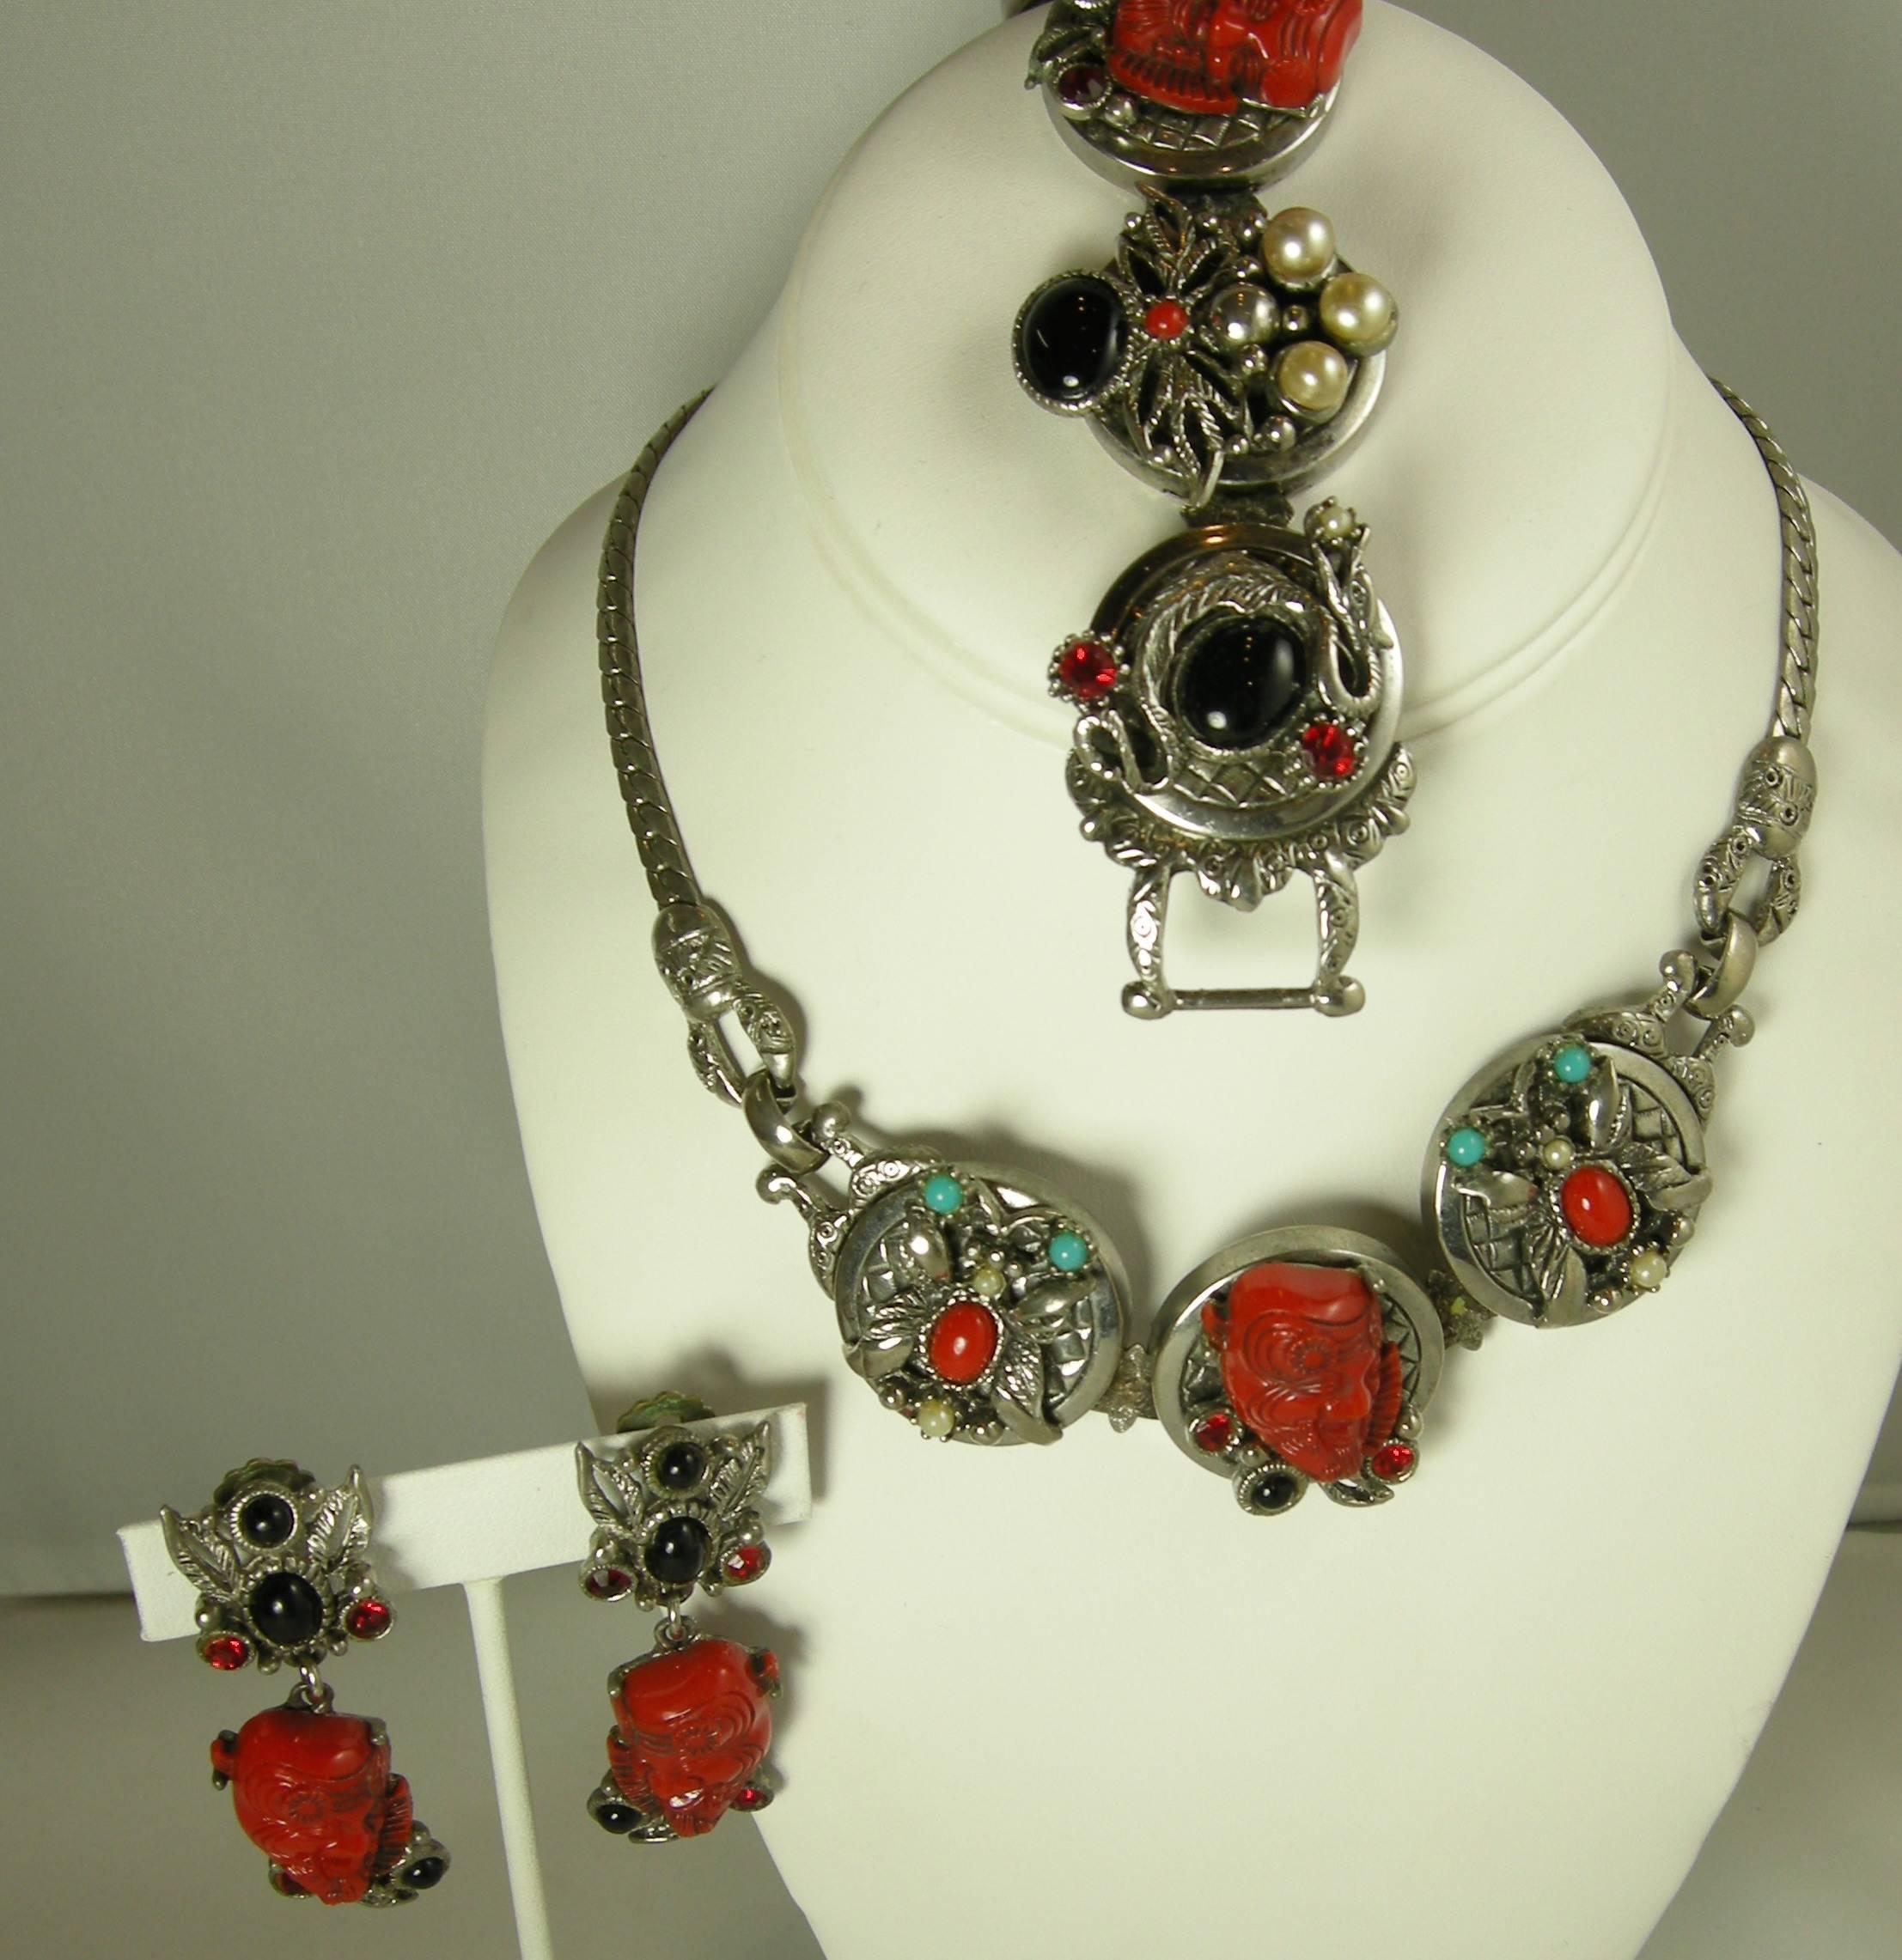 This very rare set is by Selro. The necklace features the famous red devil design with three charms. It has faux coral, as well as red, white, black cabochon stones accentuated with red crystals. The necklace chain measures 19” x 1/4” with the each